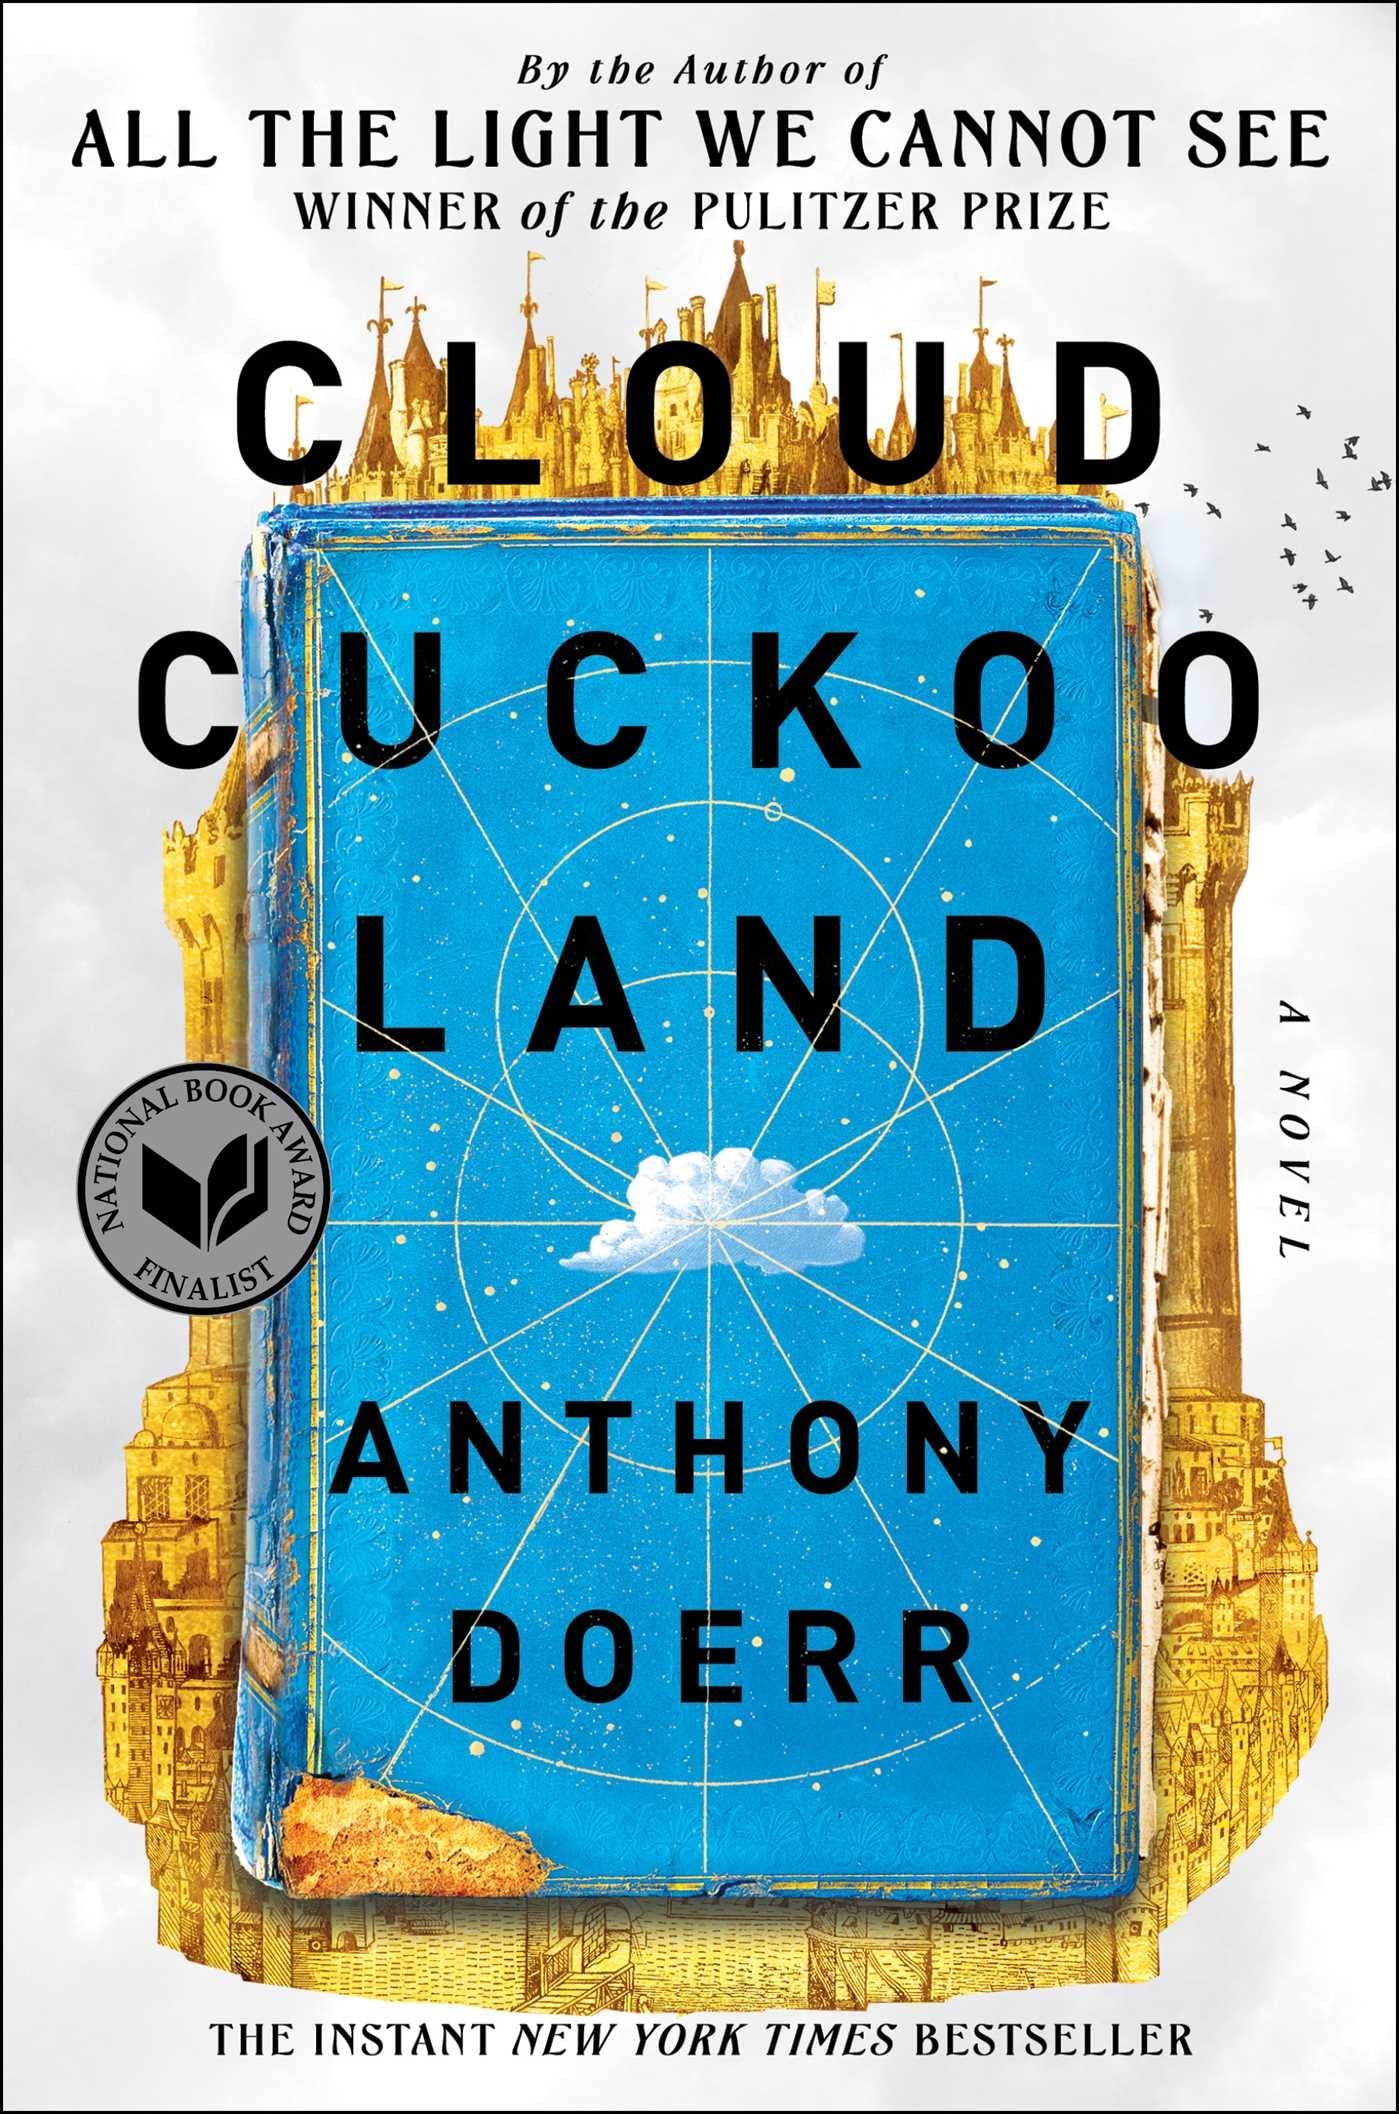 Cloud Cuckoo Land by Anthony Doerr book cover